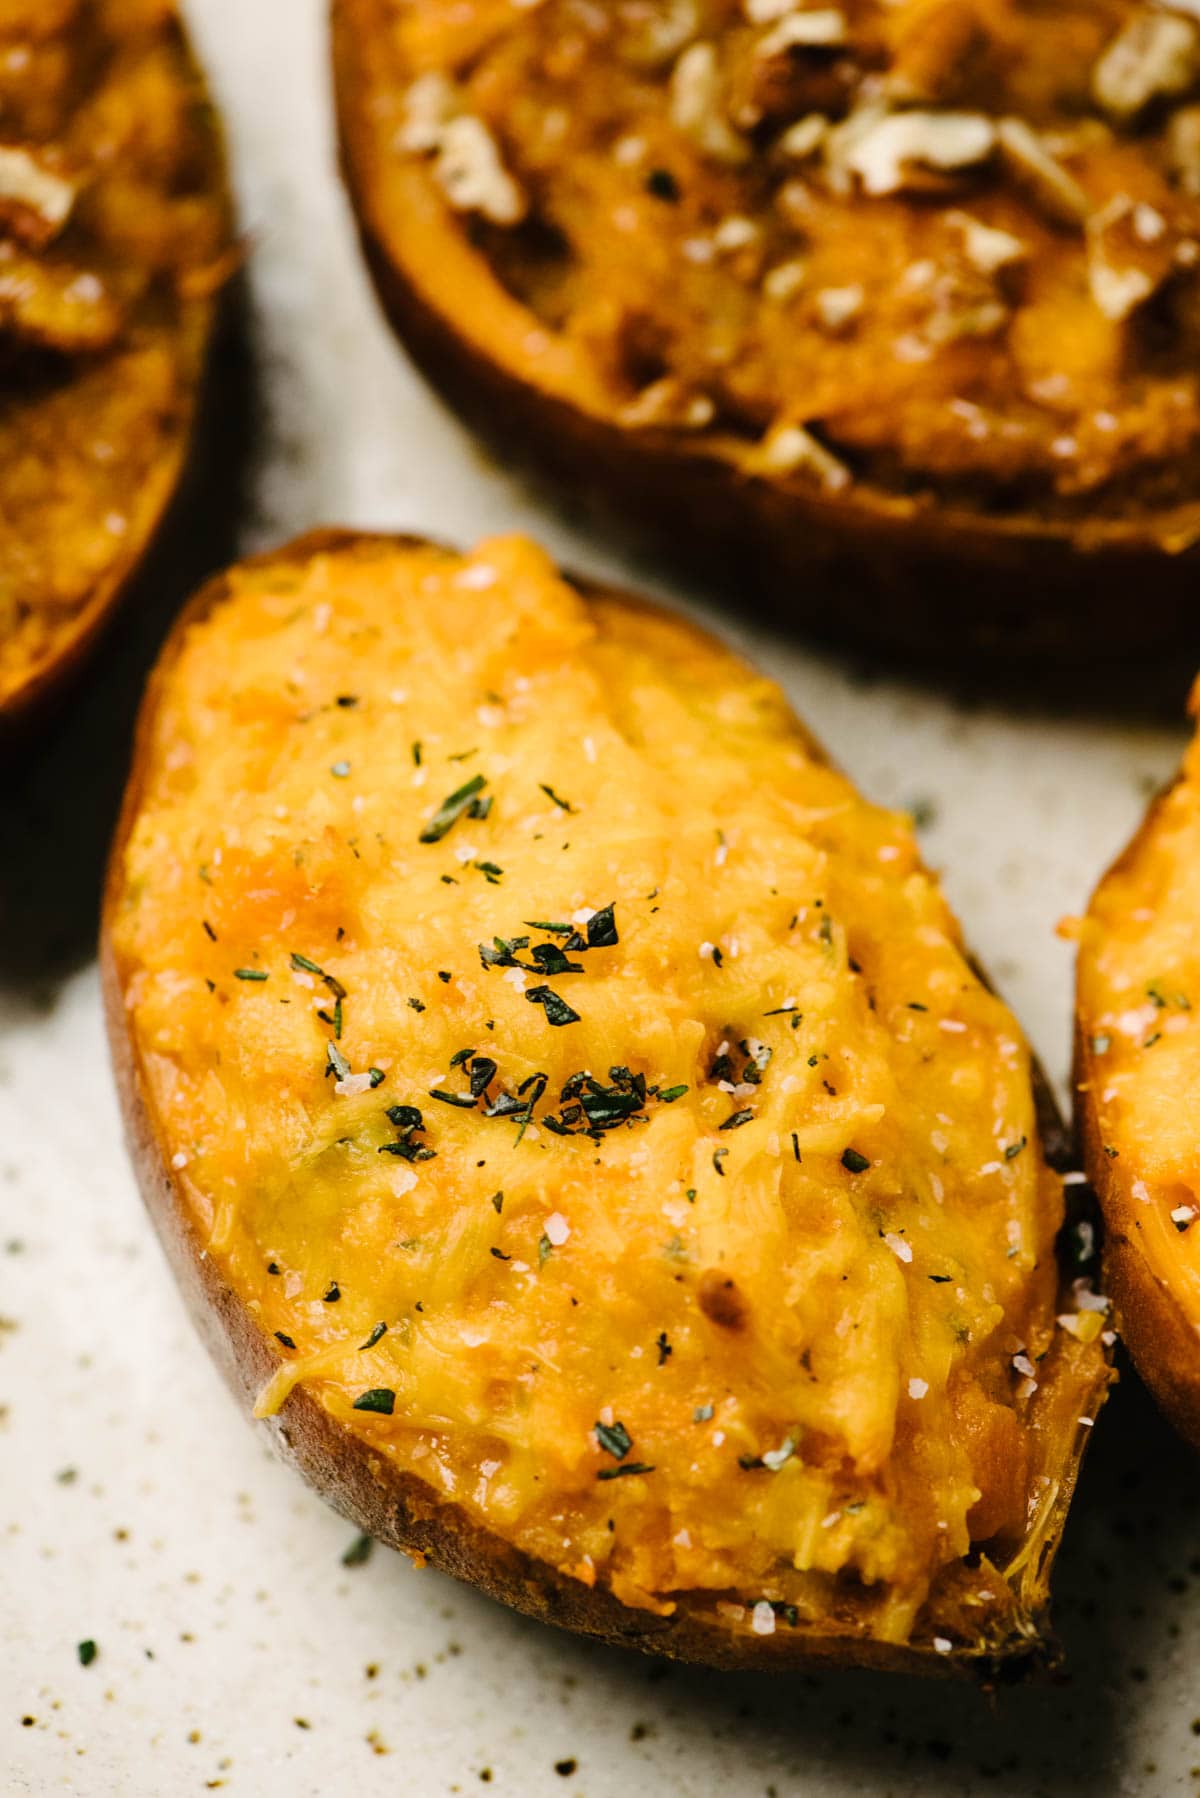 Twice baked sweet potatoes on a baking sheet, finished with melted cheese and spices.